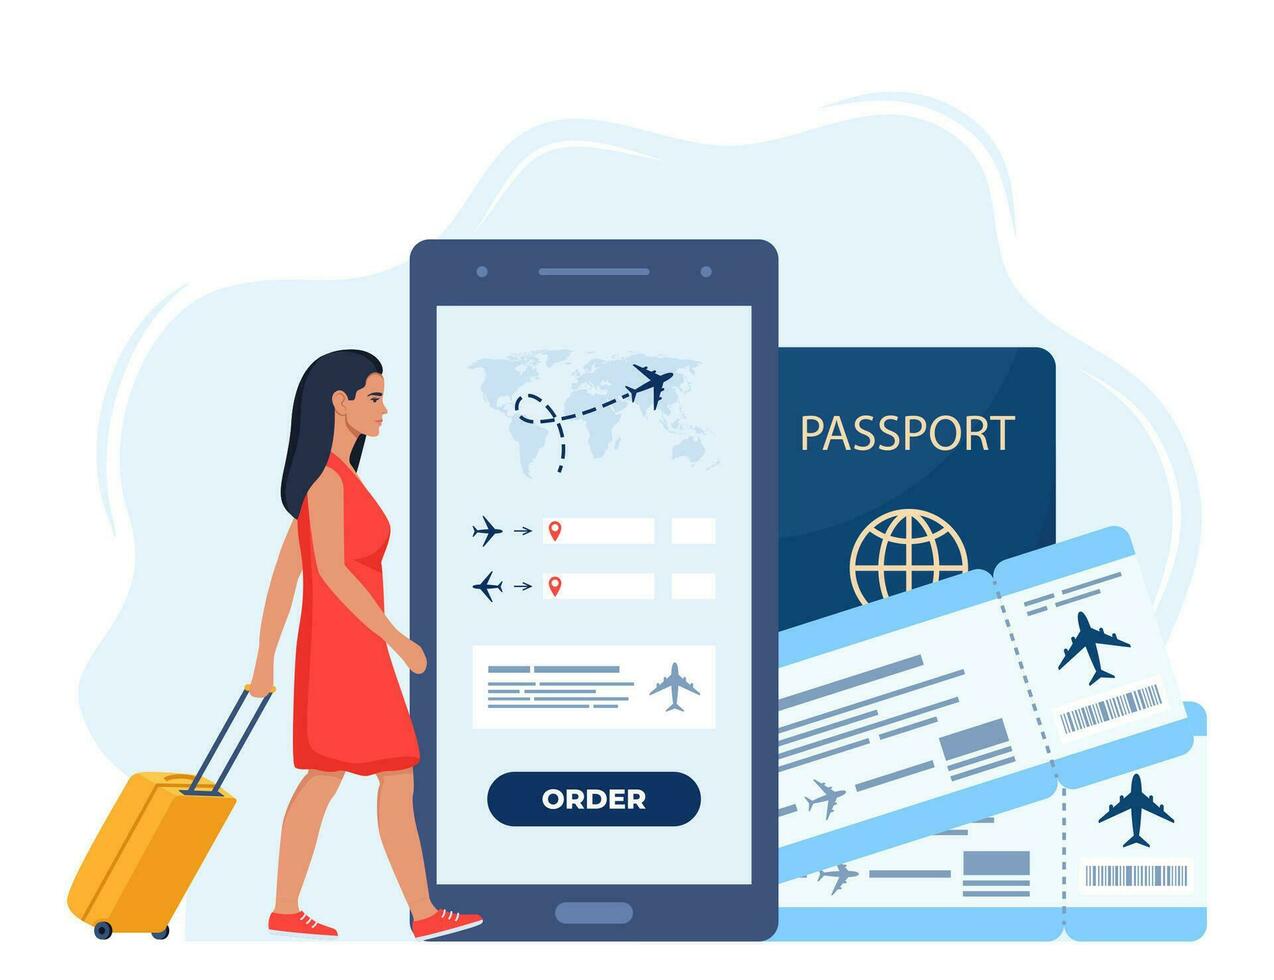 Mobile app for buying ticket with smartphone. Booking flights travel. Air tickets, passport, woman walking with suitcase. Travel, journey, business trip. Vector illustration.